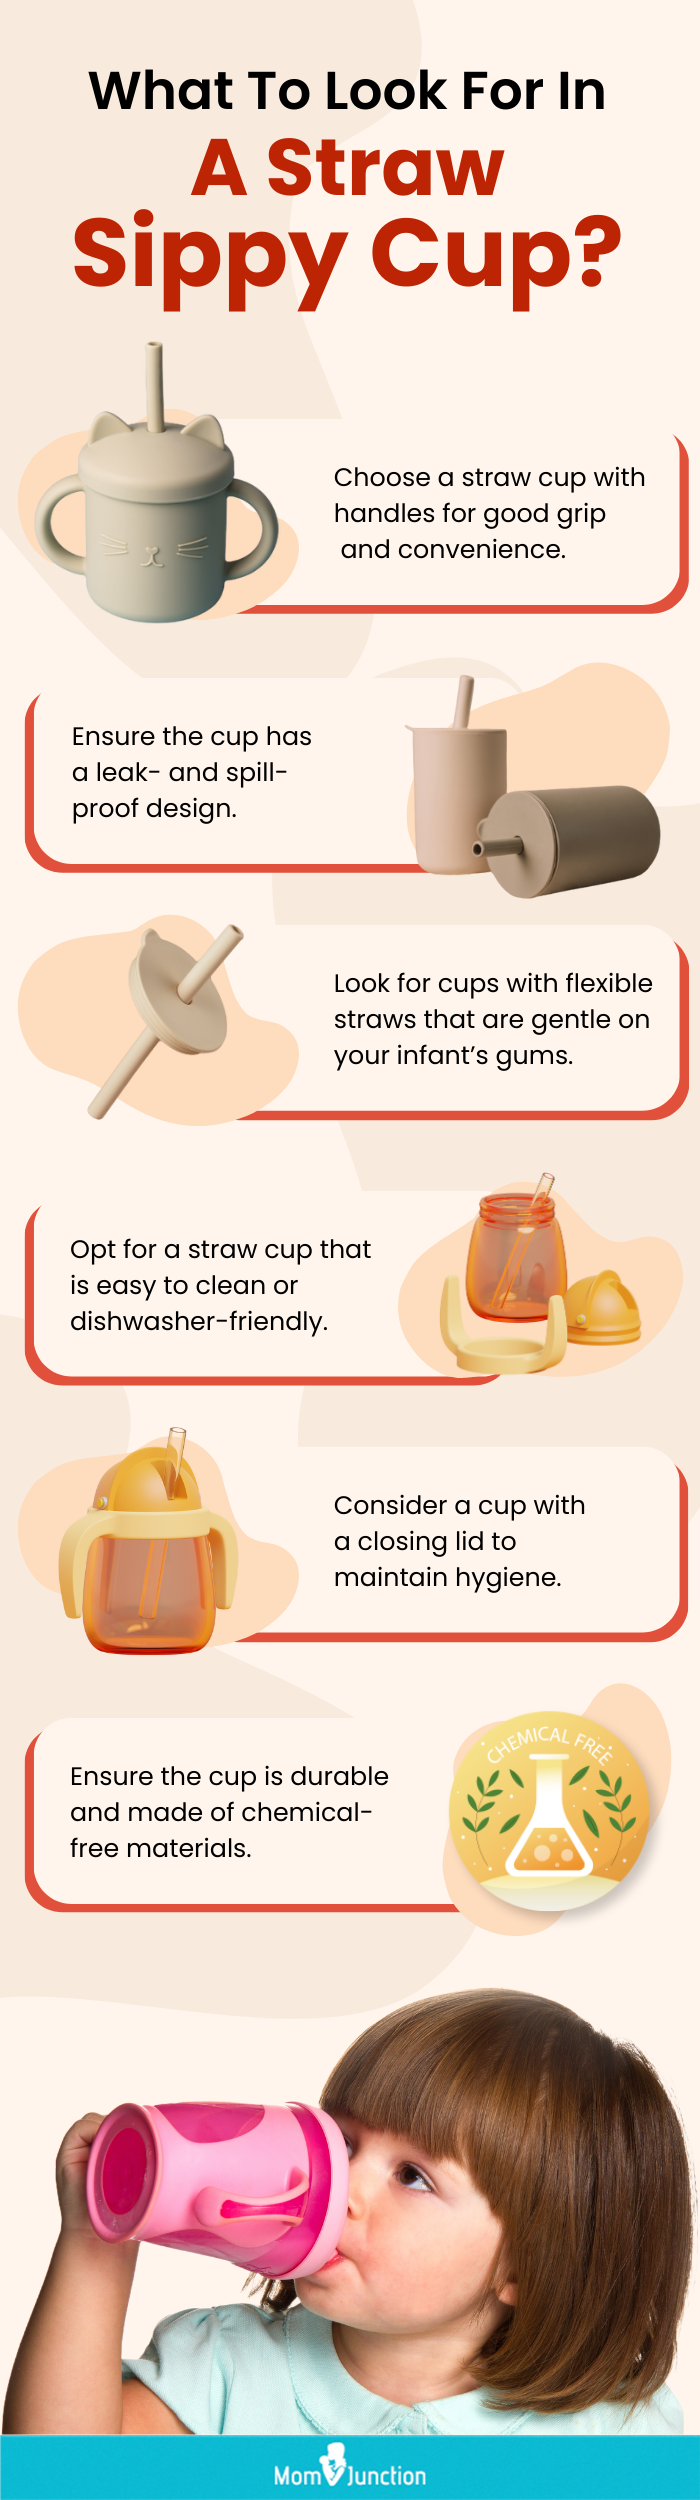 https://www.momjunction.com/wp-content/uploads/2021/09/Infographic-Things-To-Consider-When-Buying-A-Straw-Sippy-Cup.png